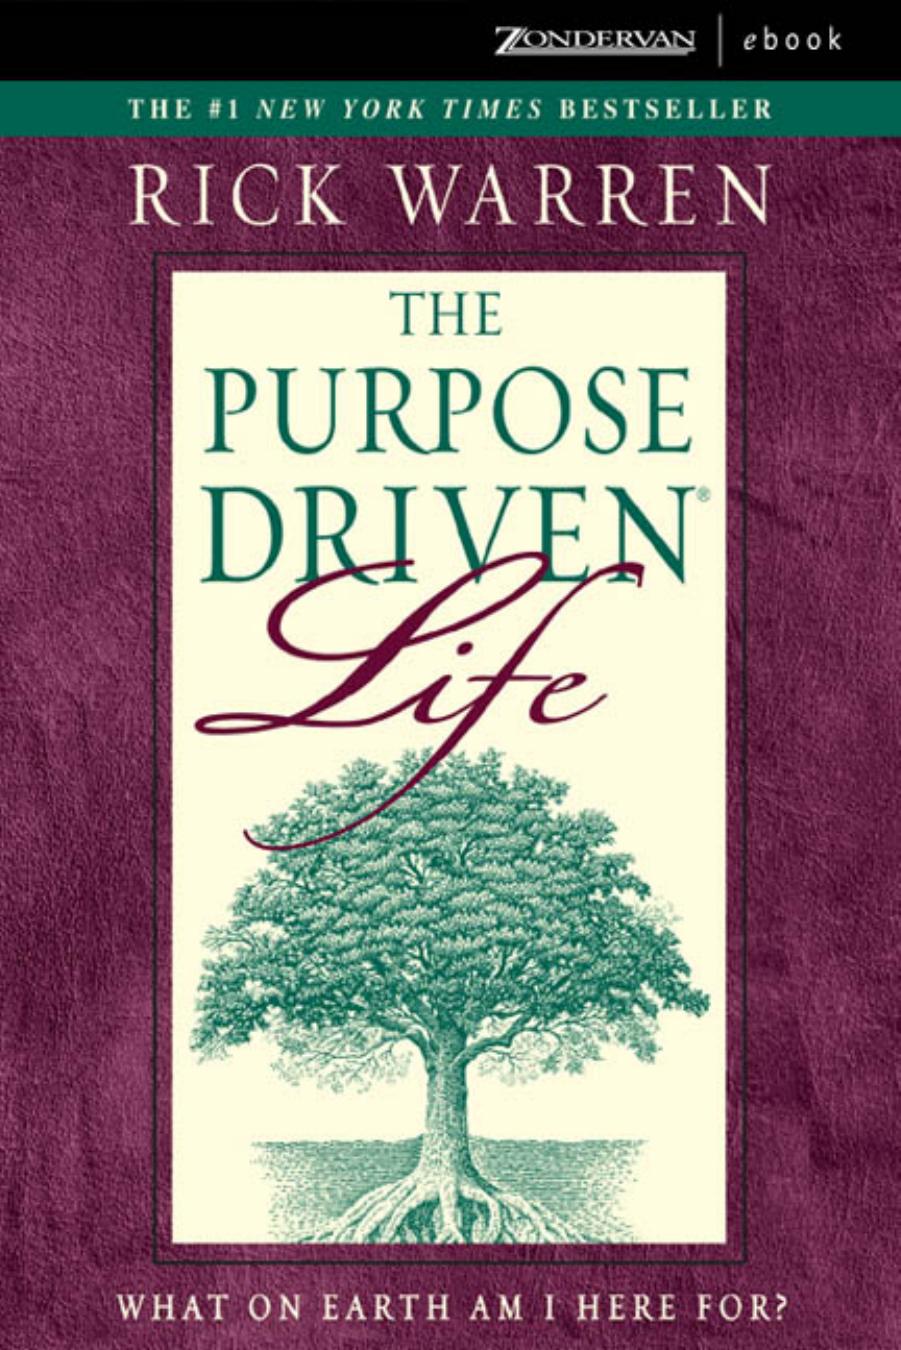 PurposThe Purpose Driven Life: What on Earth Am I Here For? 40 Days of Purpose Campaign Edition  by Rick Warren